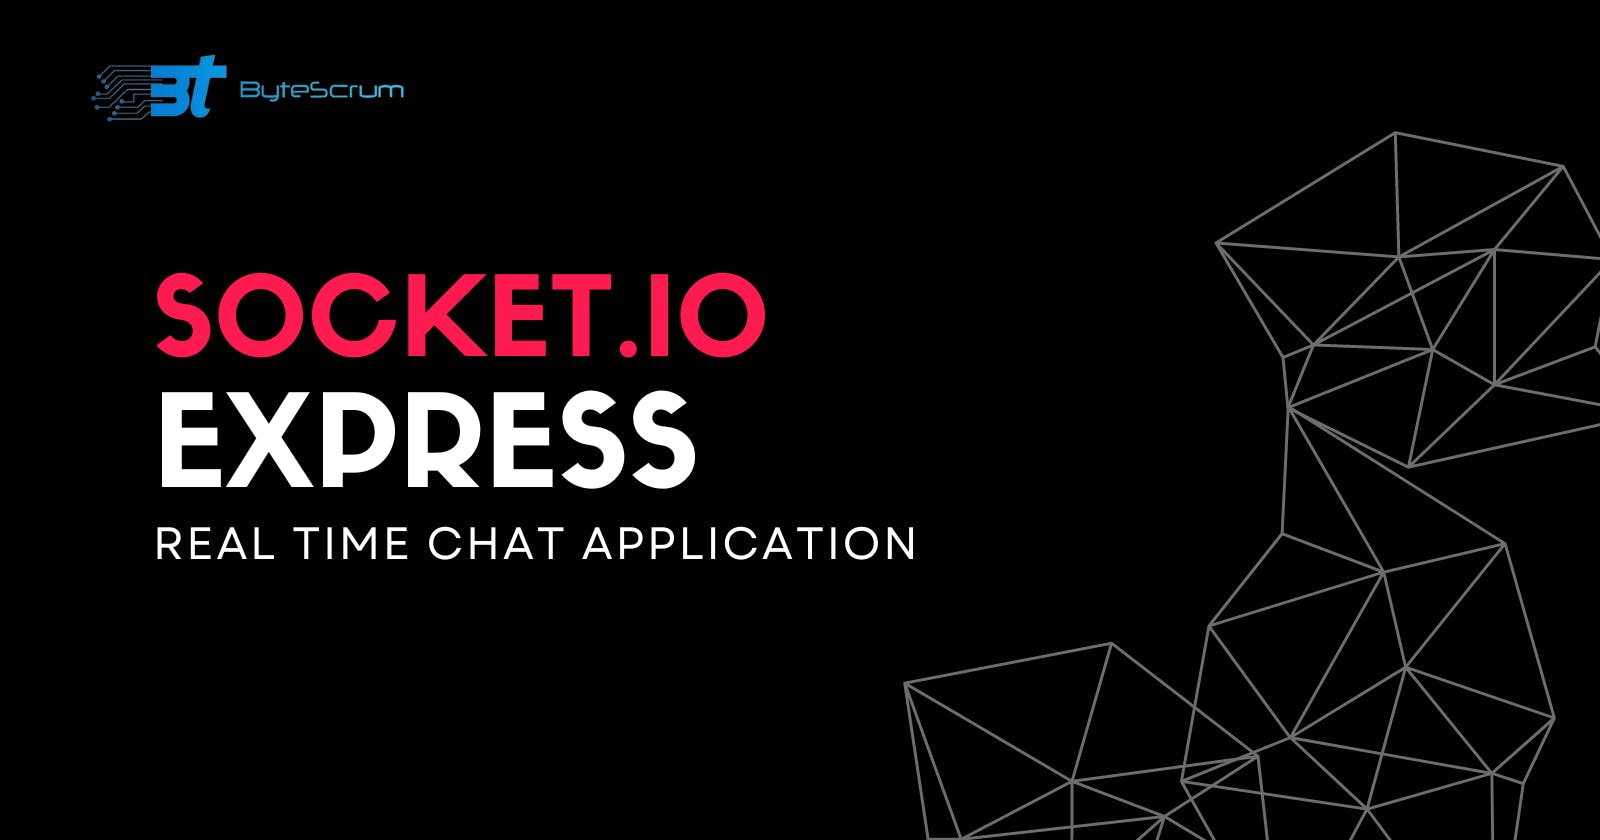 Building a Real-Time Chat Application with Socket.io